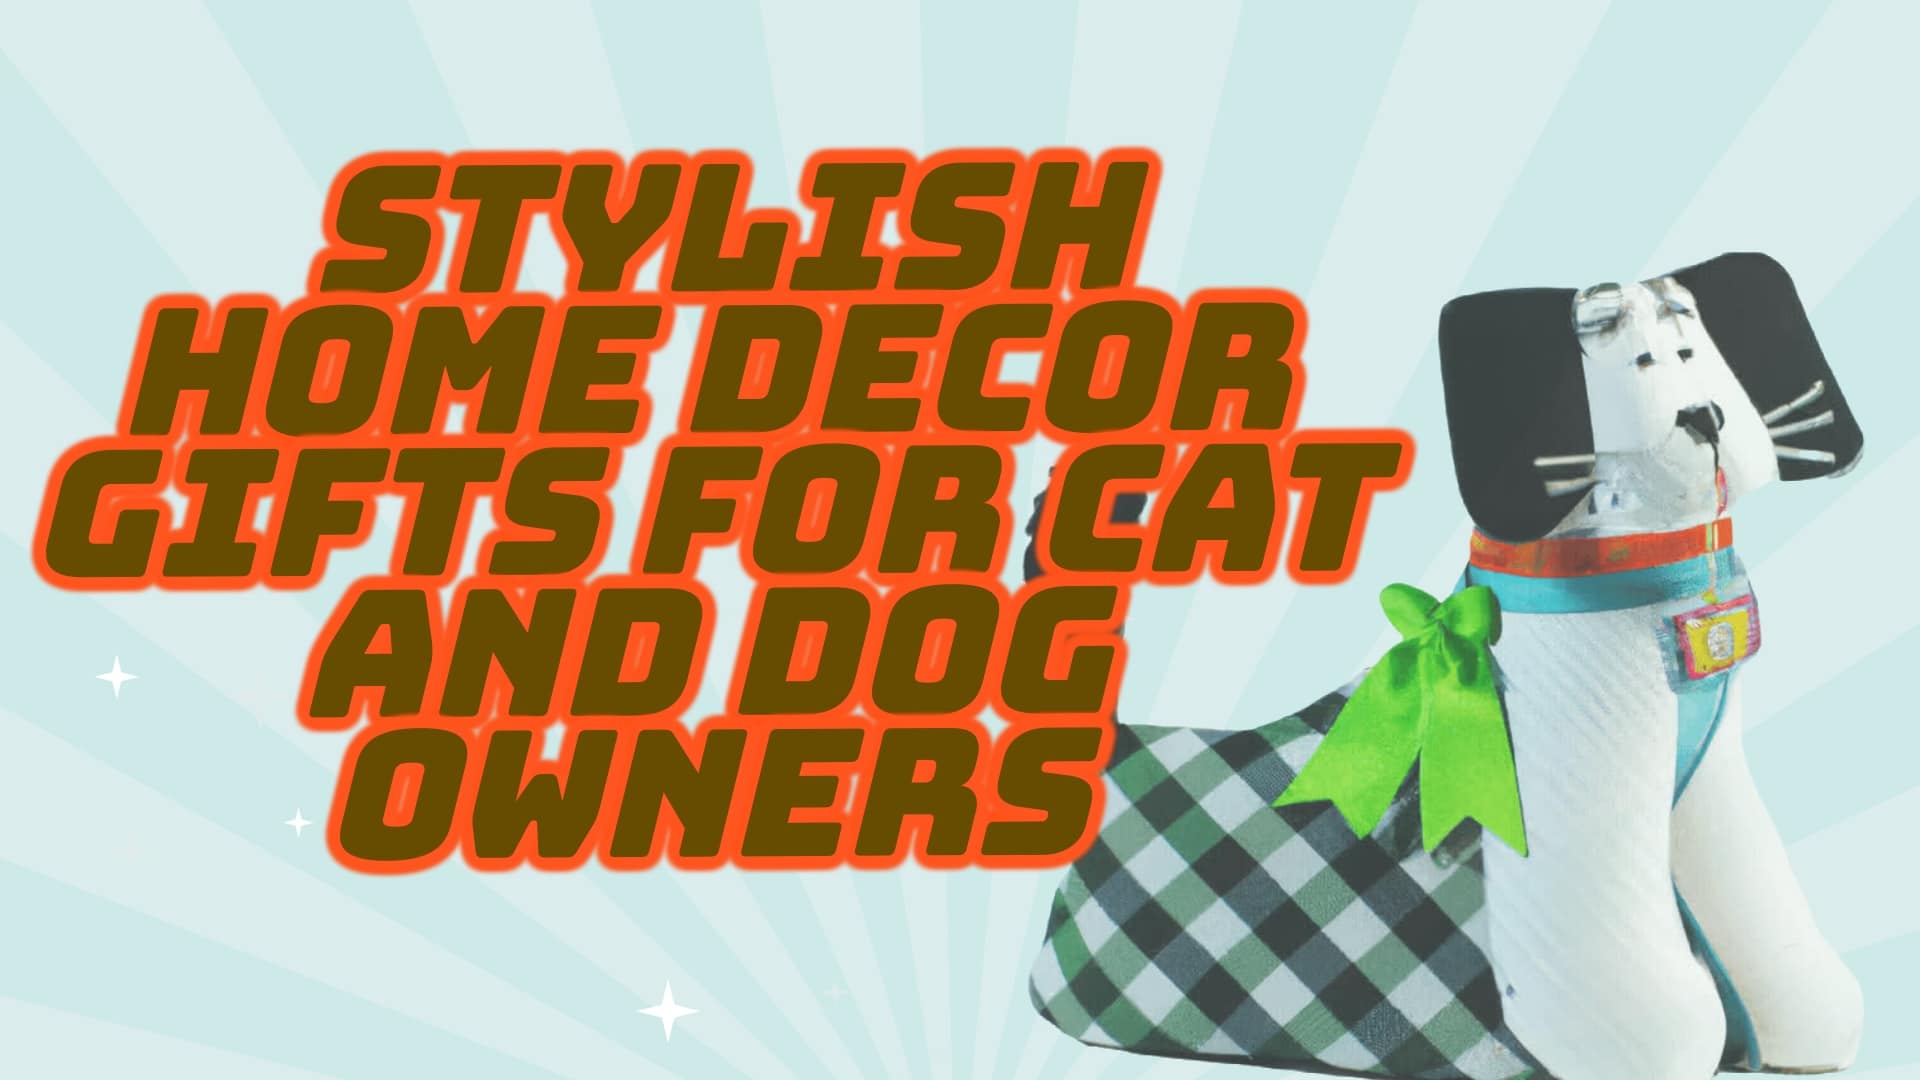 Feline and Canine Chic: Stylish Home Decor Gifts for Cat and Dog Owners